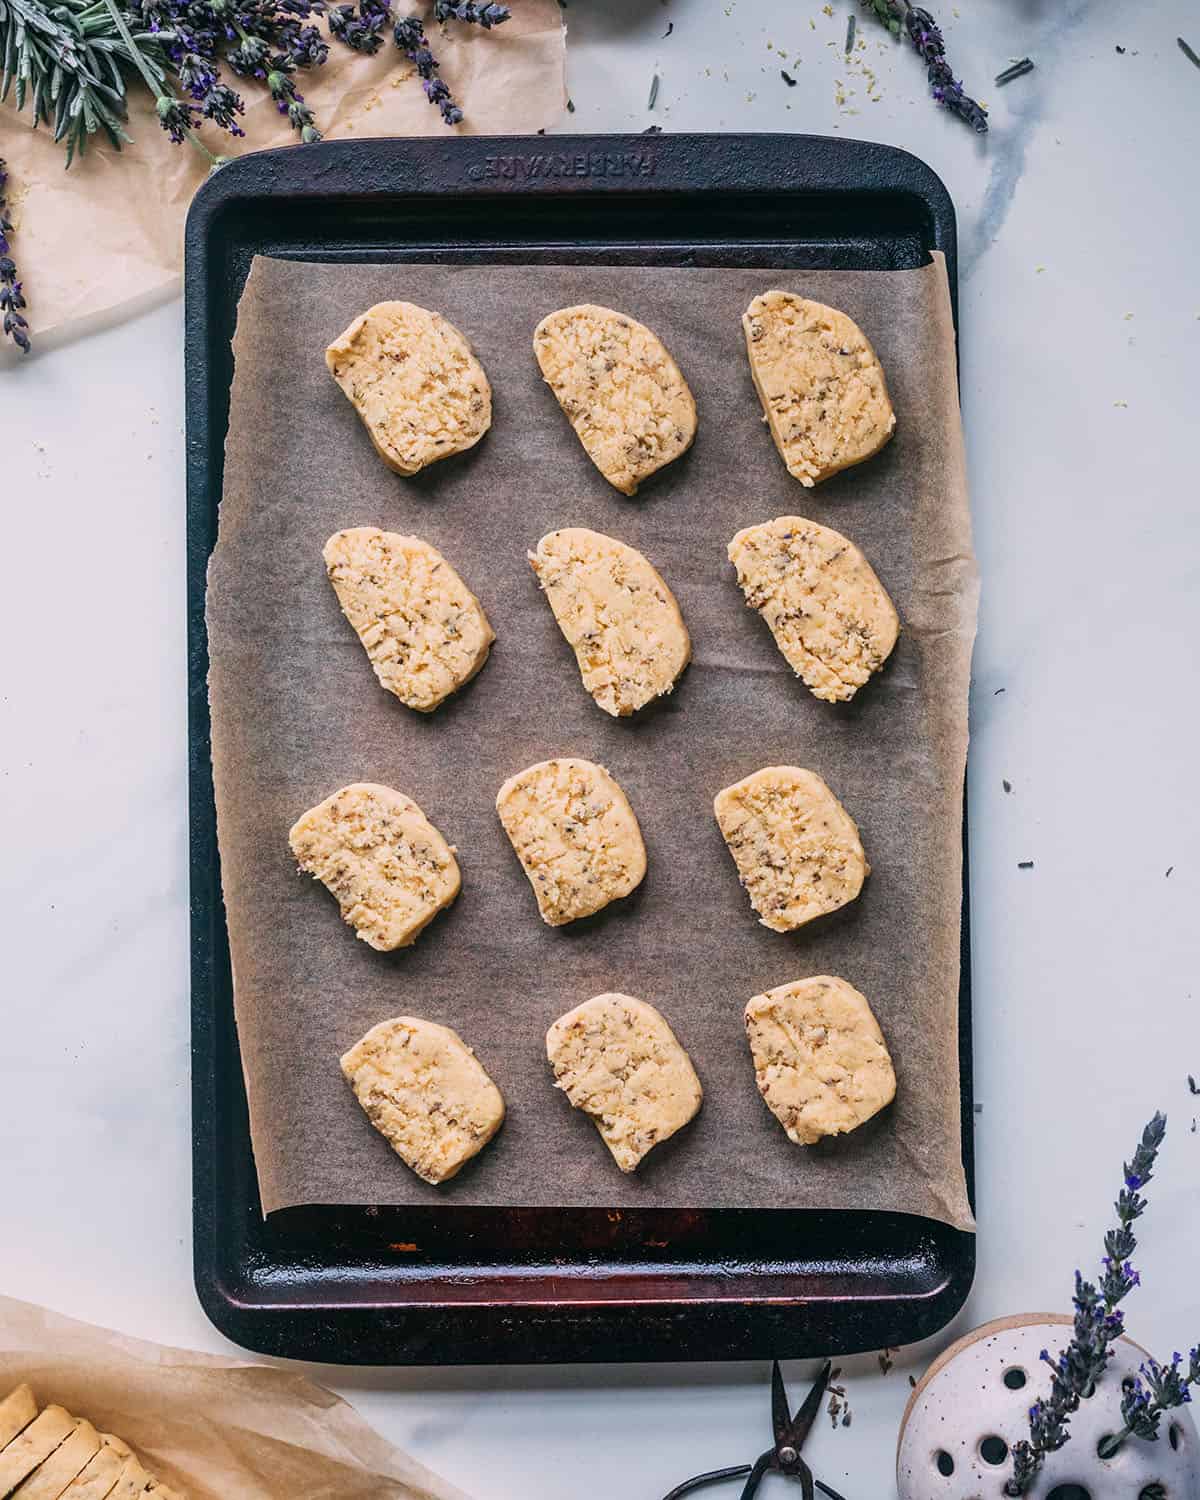 Chilled dough rounds flat on a baking sheet lined with parchment paper, surrounded by fresh lavender.